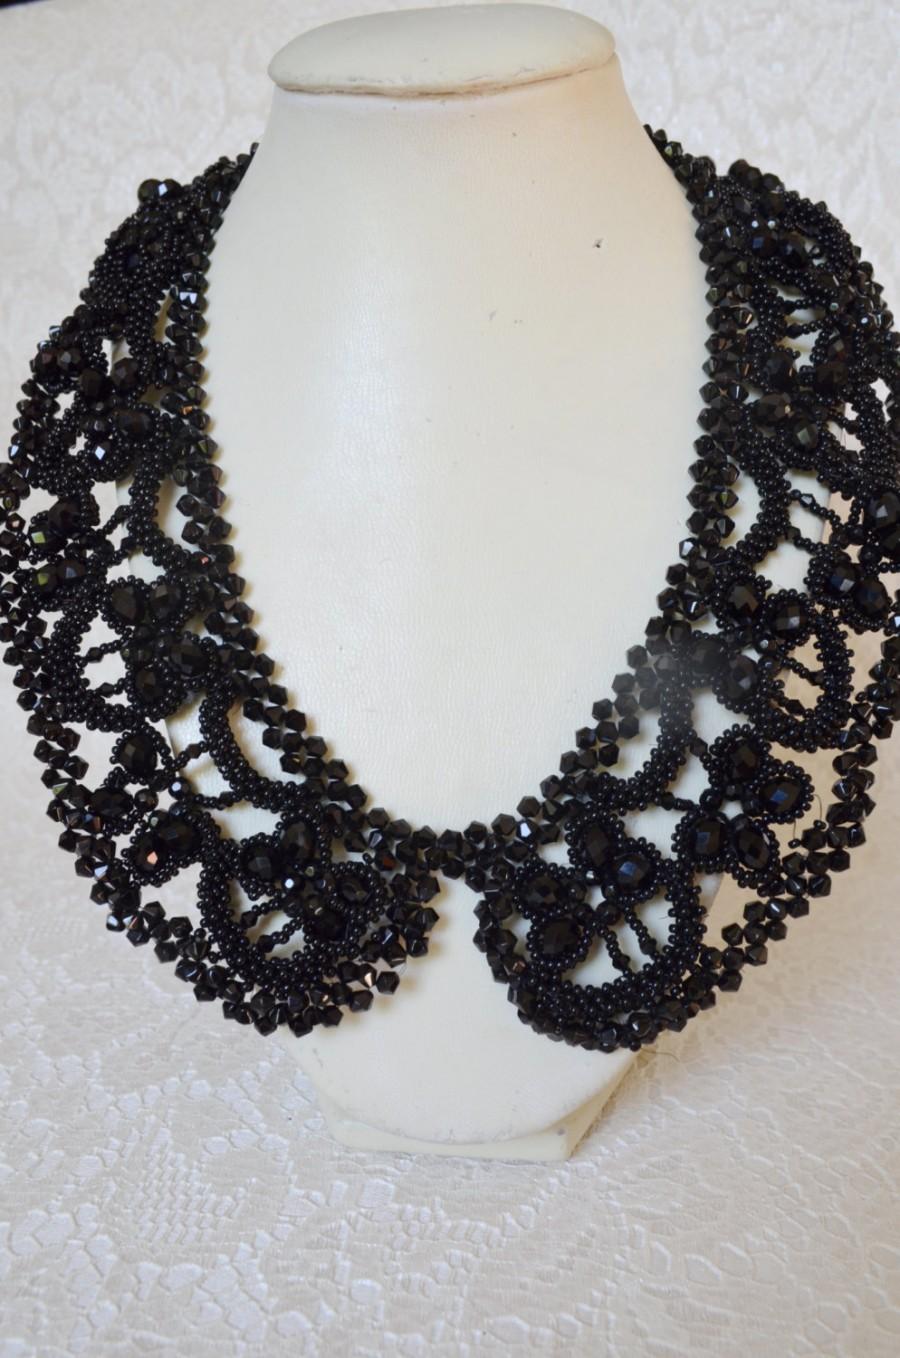 Wedding - Black Statement Collar Necklace, Beaded Necklace, Seed Bead Necklace, Beading Necklace, Holiday Necklace, Beadwoven, Gift for Her